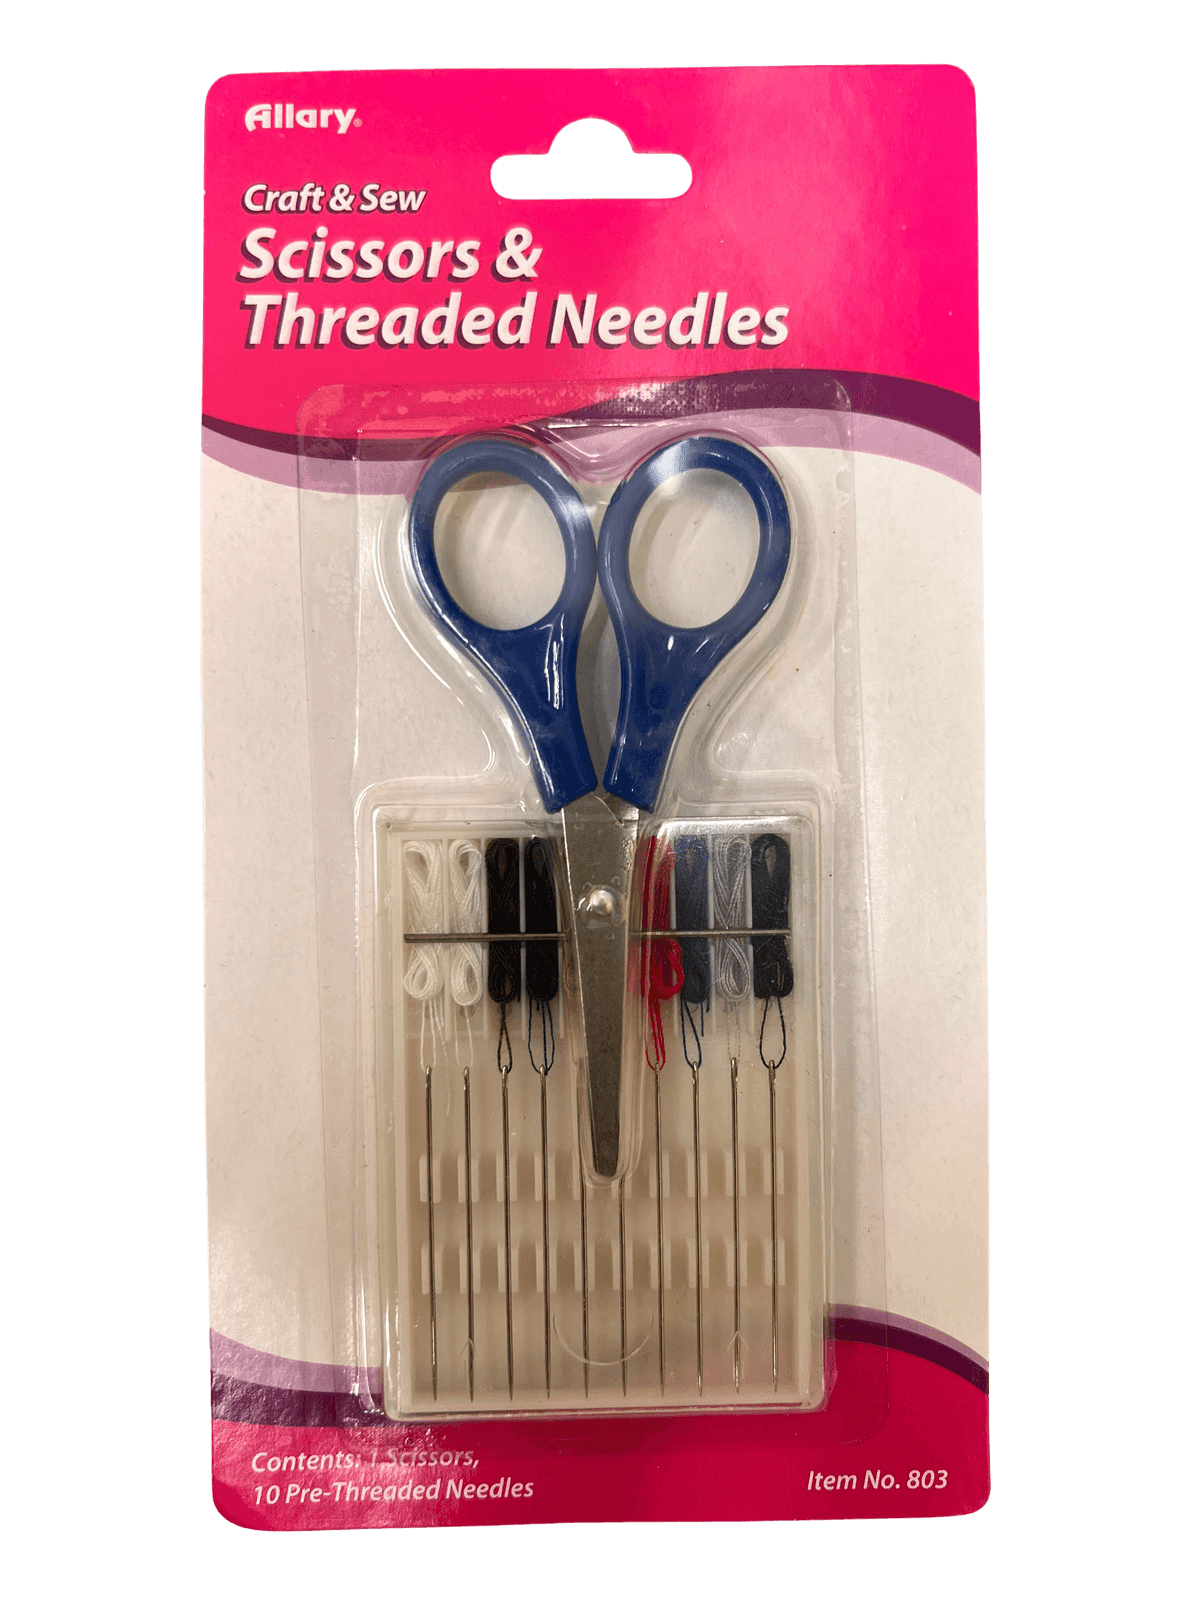 Threaded Needles (10pcs) With Scissors - The Low Vision Store